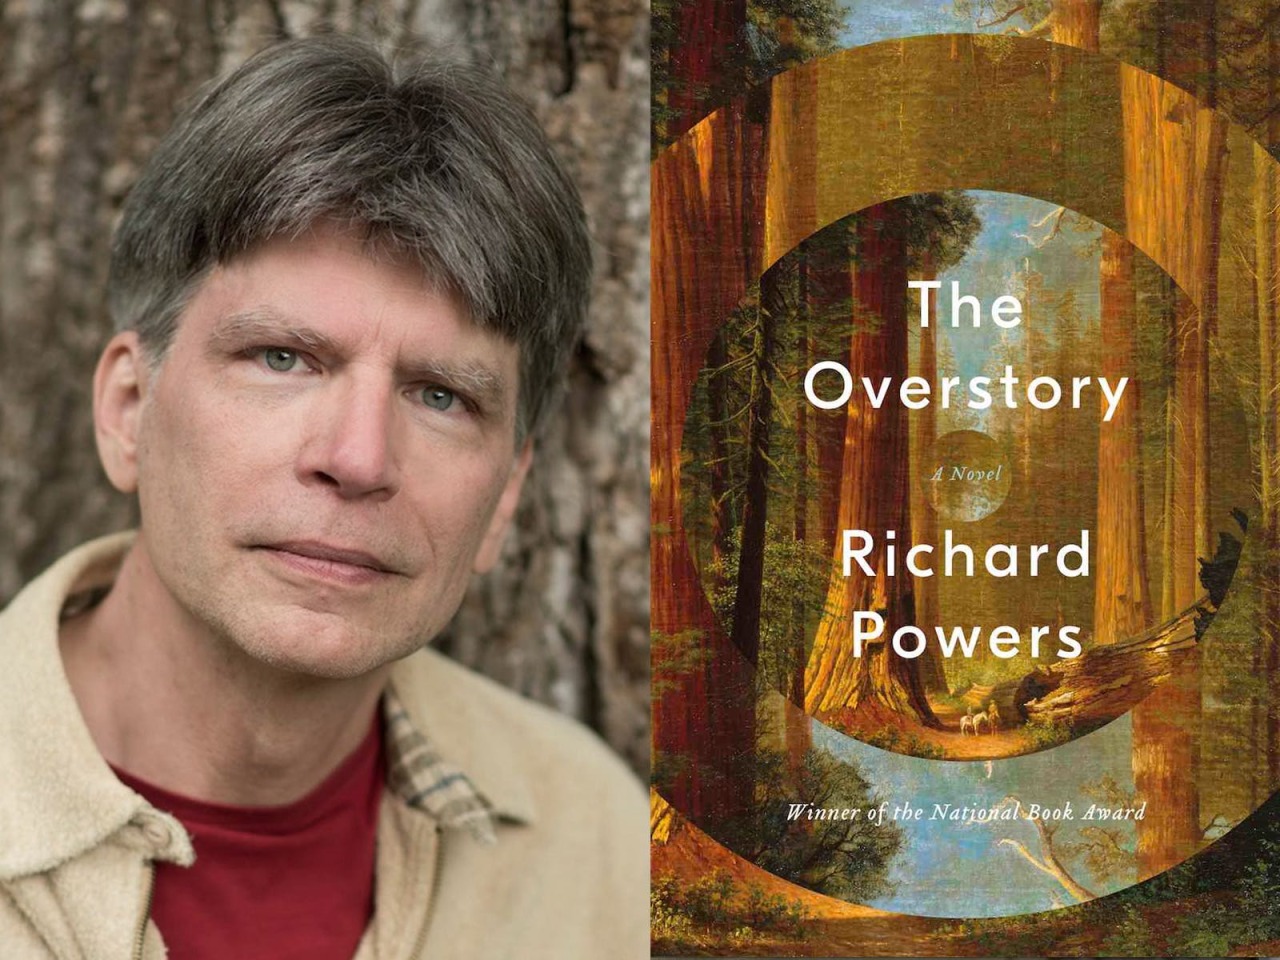 richard powers the overstory